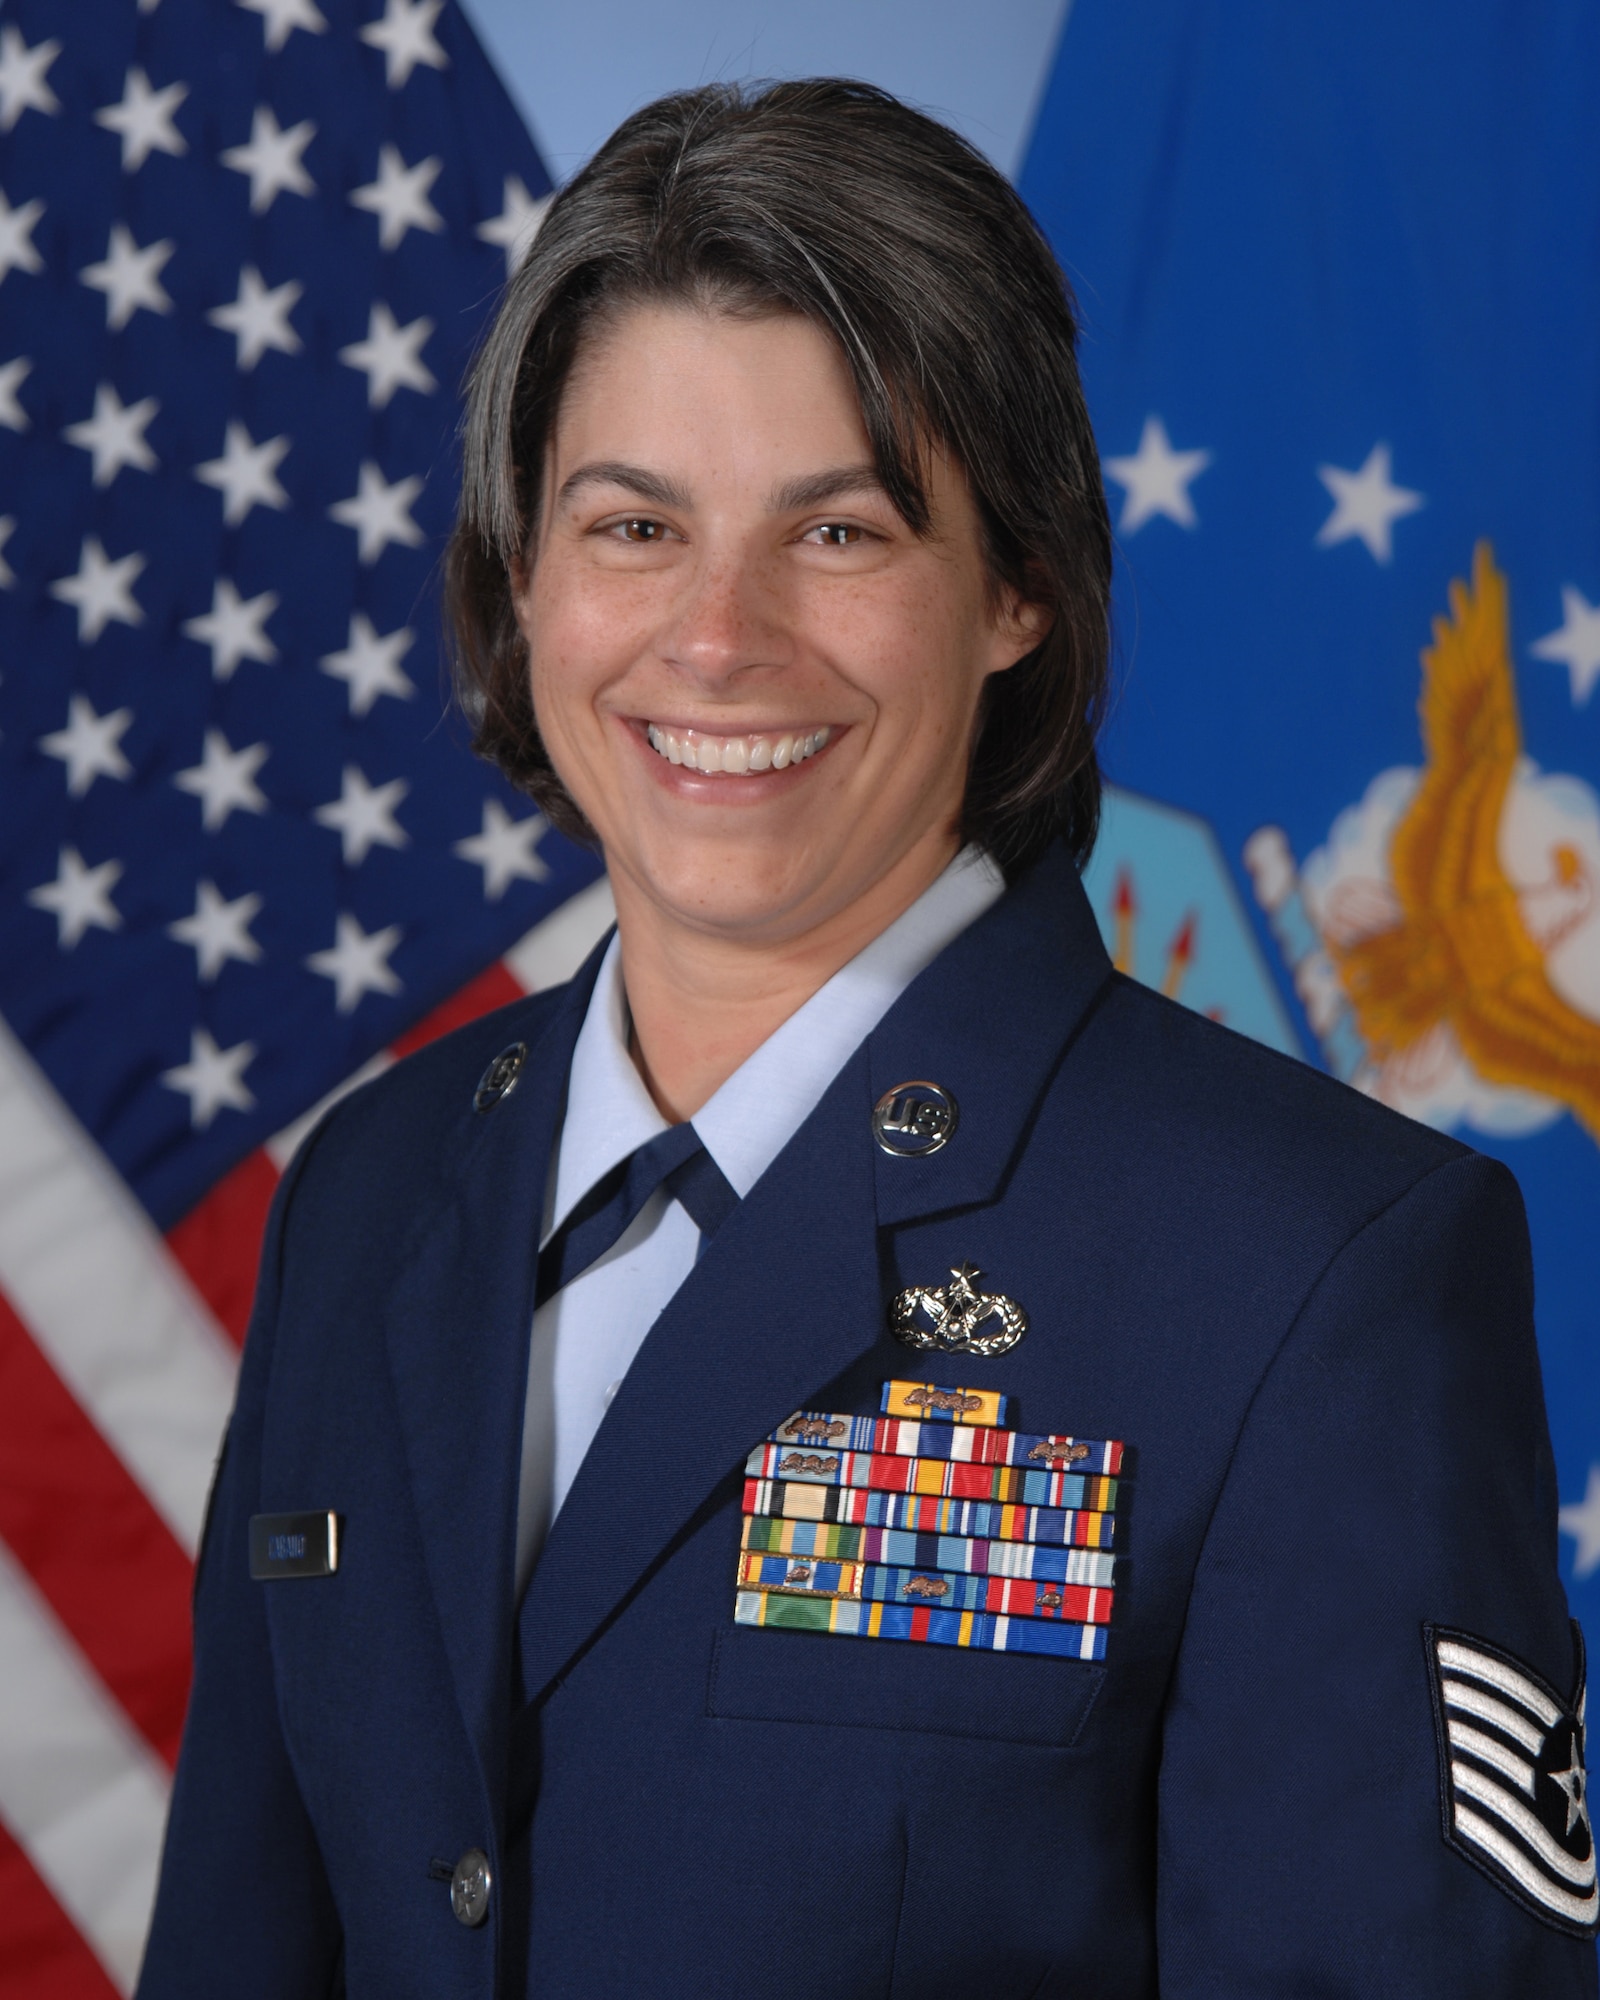 Tech. Sgt. Nadine Cabano, a utilities craftsman with the 27th Special Operations Civil Engineer Squadron at Cannon Air Force Base, N.M., is the 2007 Air Force Special Operations Command NCO of the Year. (U.S. Air Force photo)